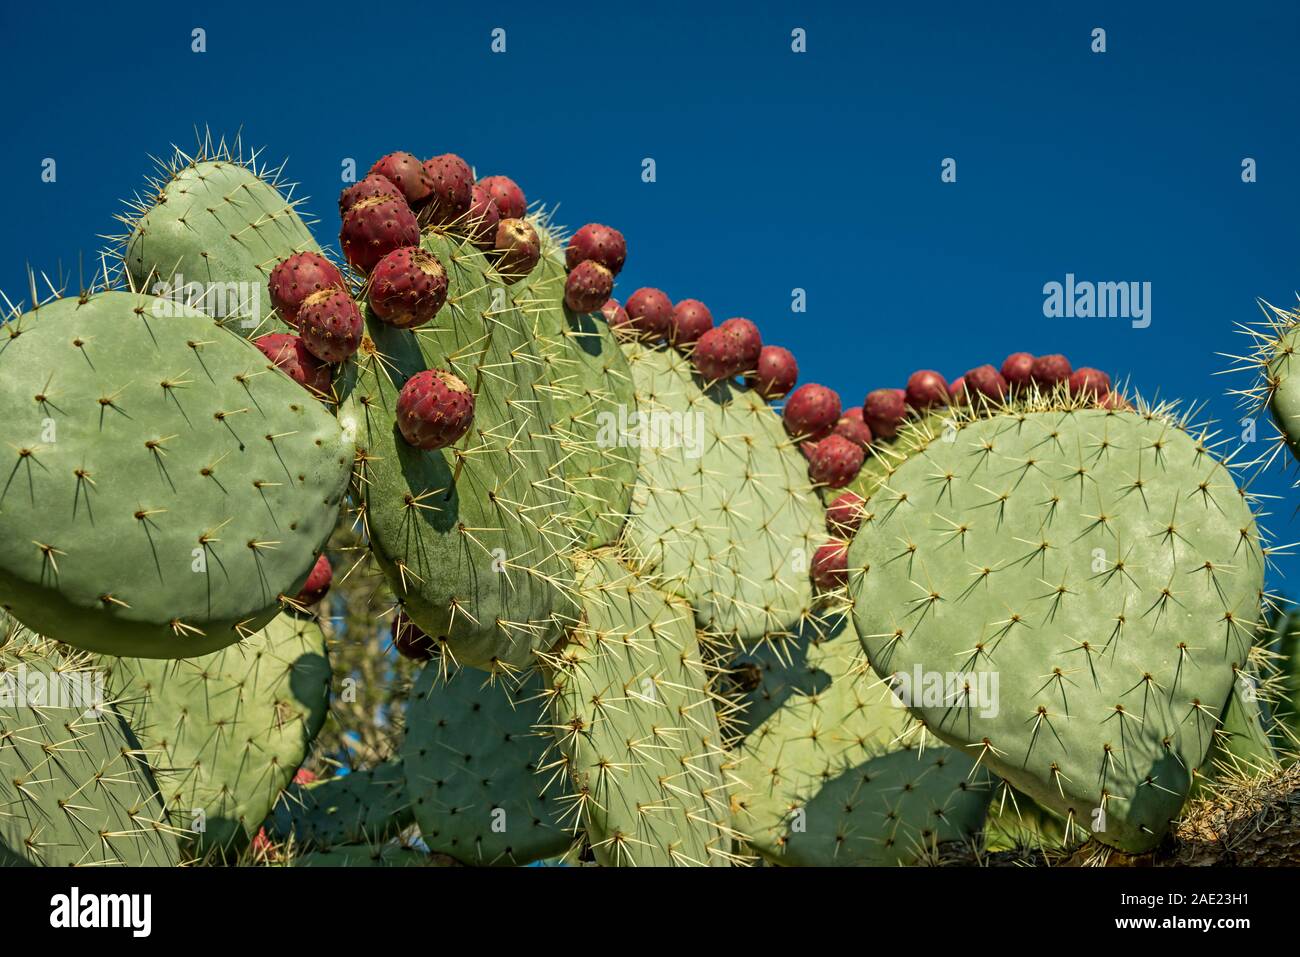 ROWS OF PRICKLY PEAR CACTUS PLANT ( OPUNTIA ) FRIUITS Stock Photo